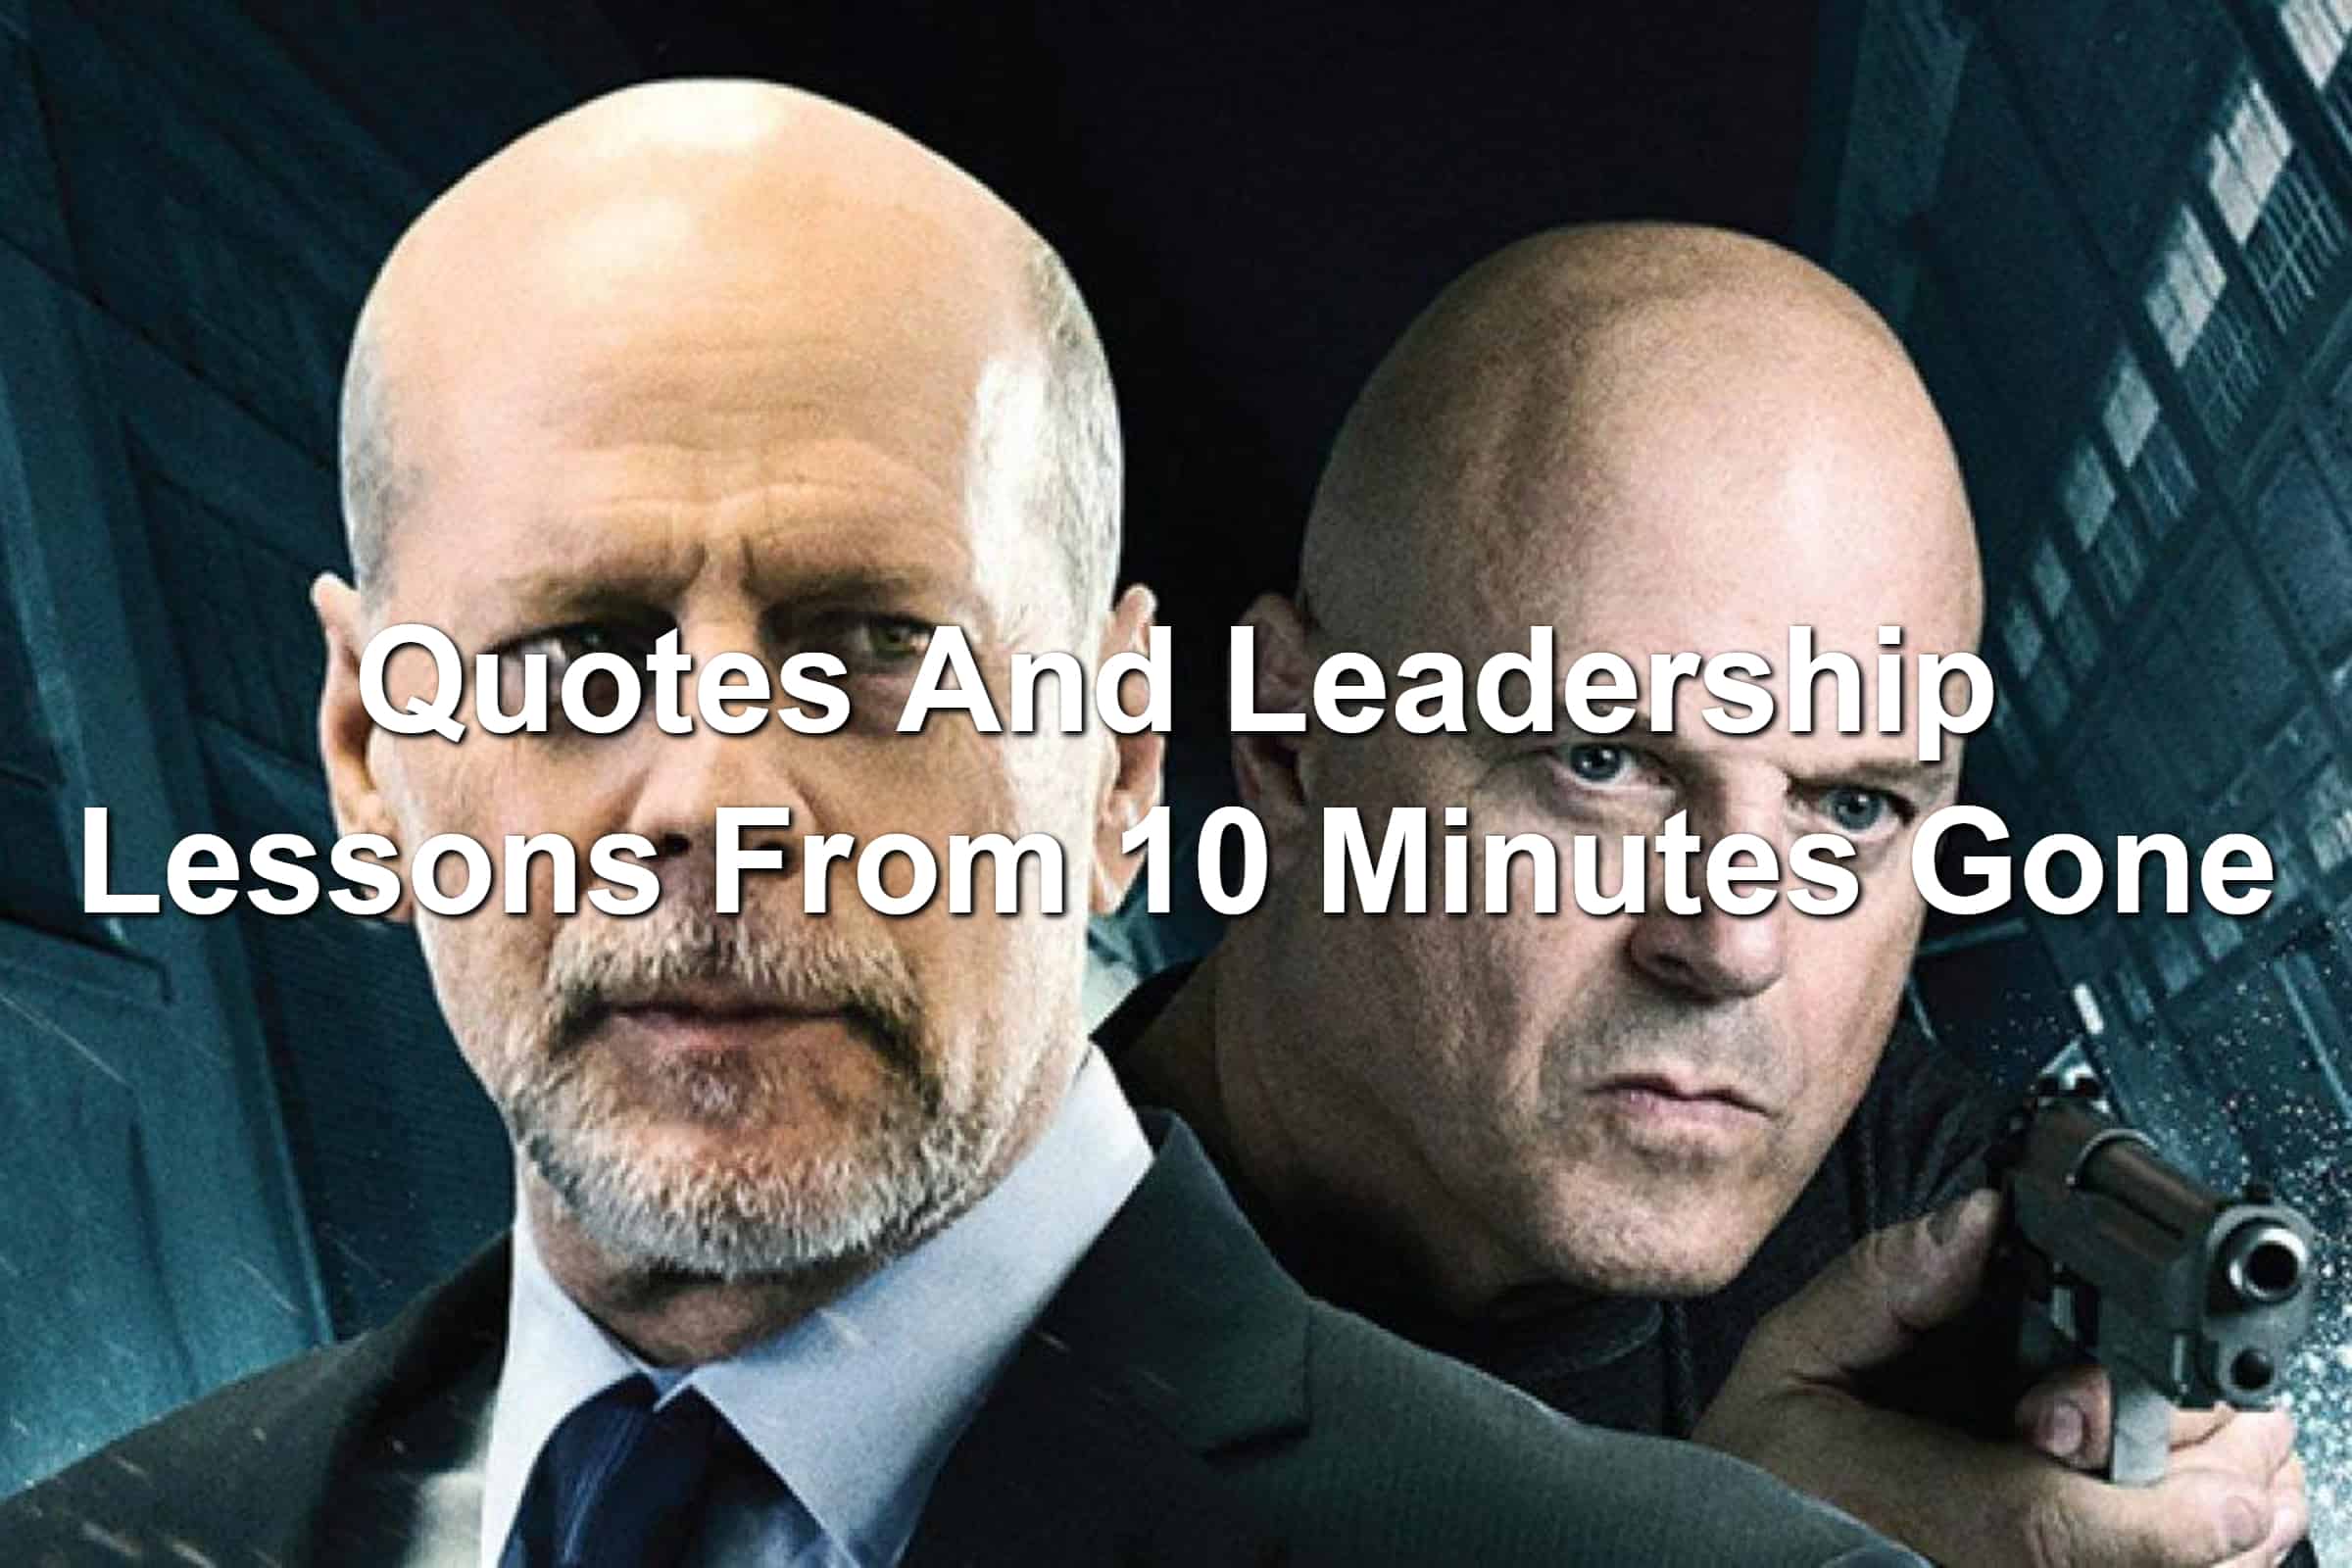 Michael Chiklis and Bruce Willis in 10 Minutes Gone movie